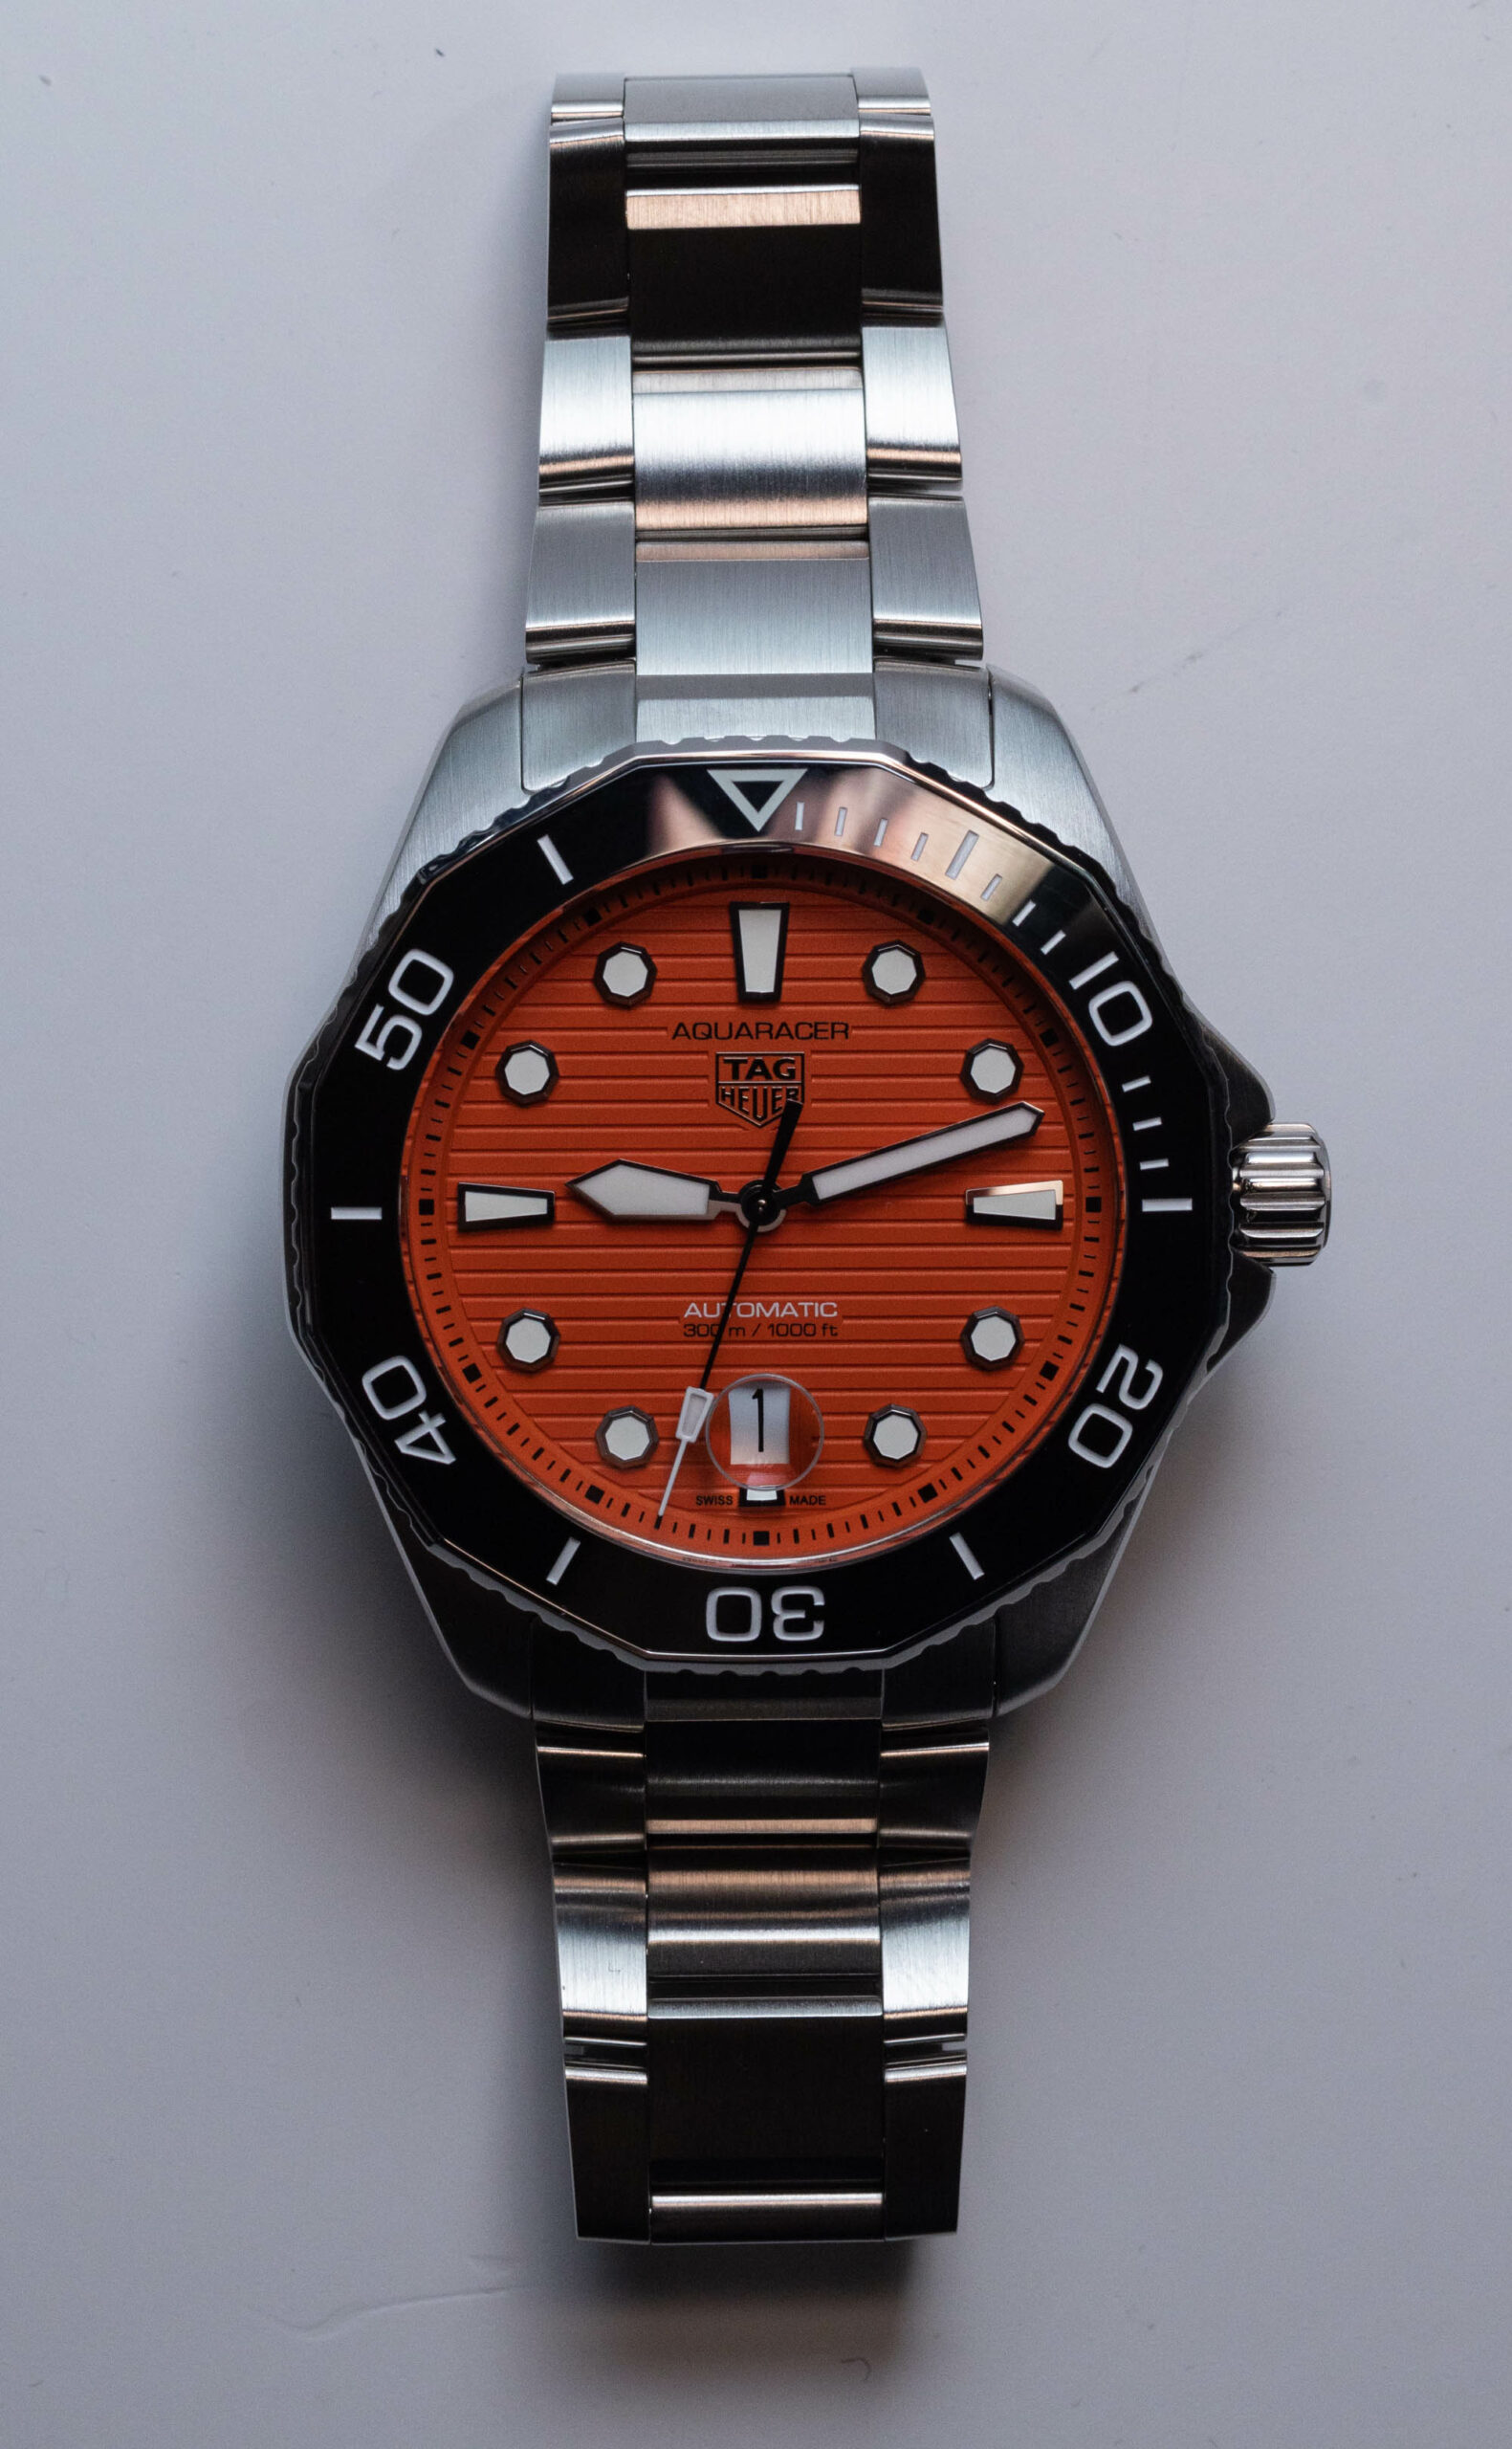 The Most Beautiful TAG Heuer Aquaracer Professional 300 Orange Diver Watch